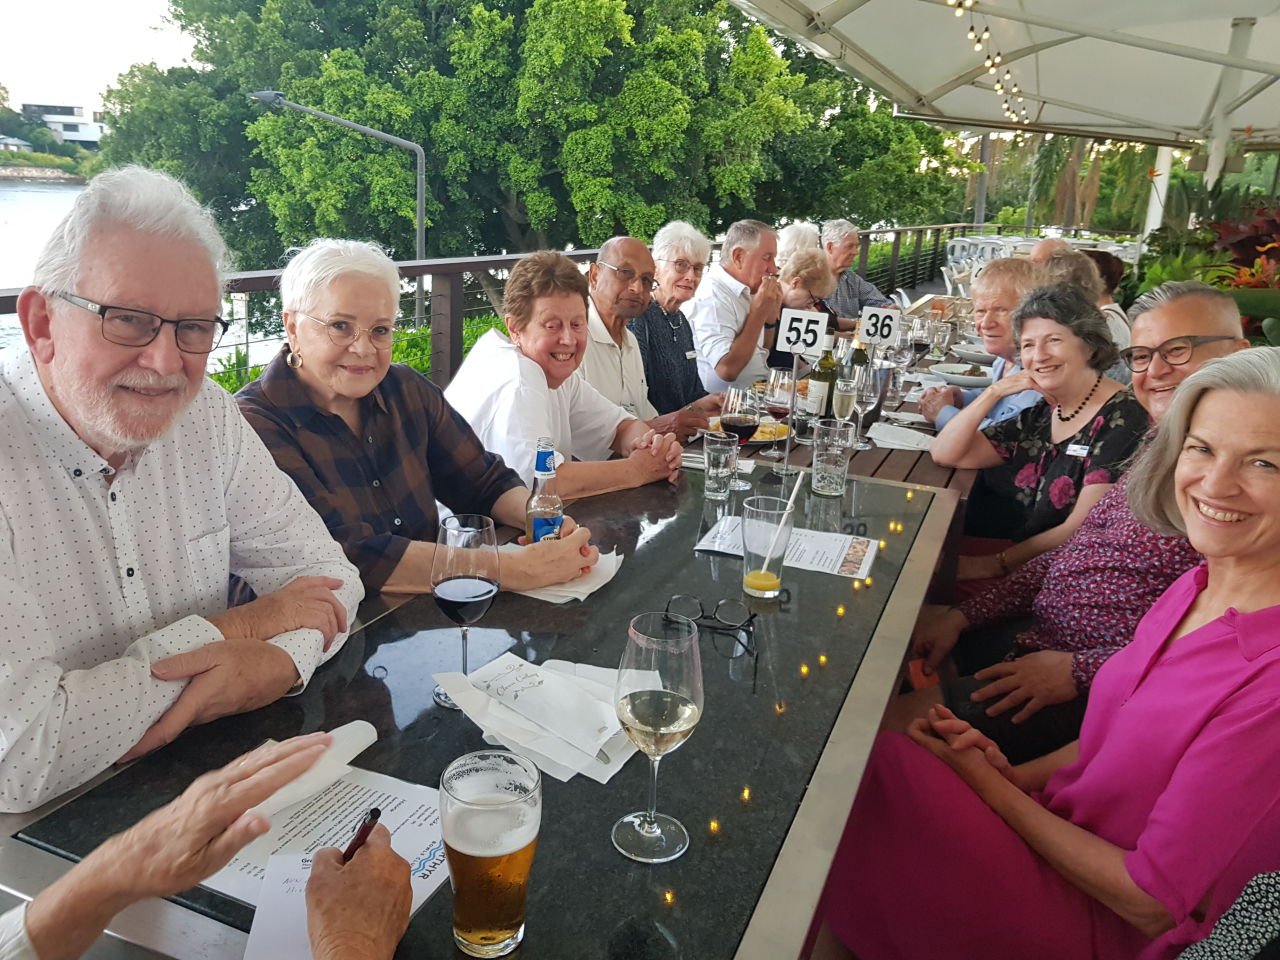 February Dinner 2023 at New Farm Bowls Club on the River.

A lovely way to spend a summer's evening.